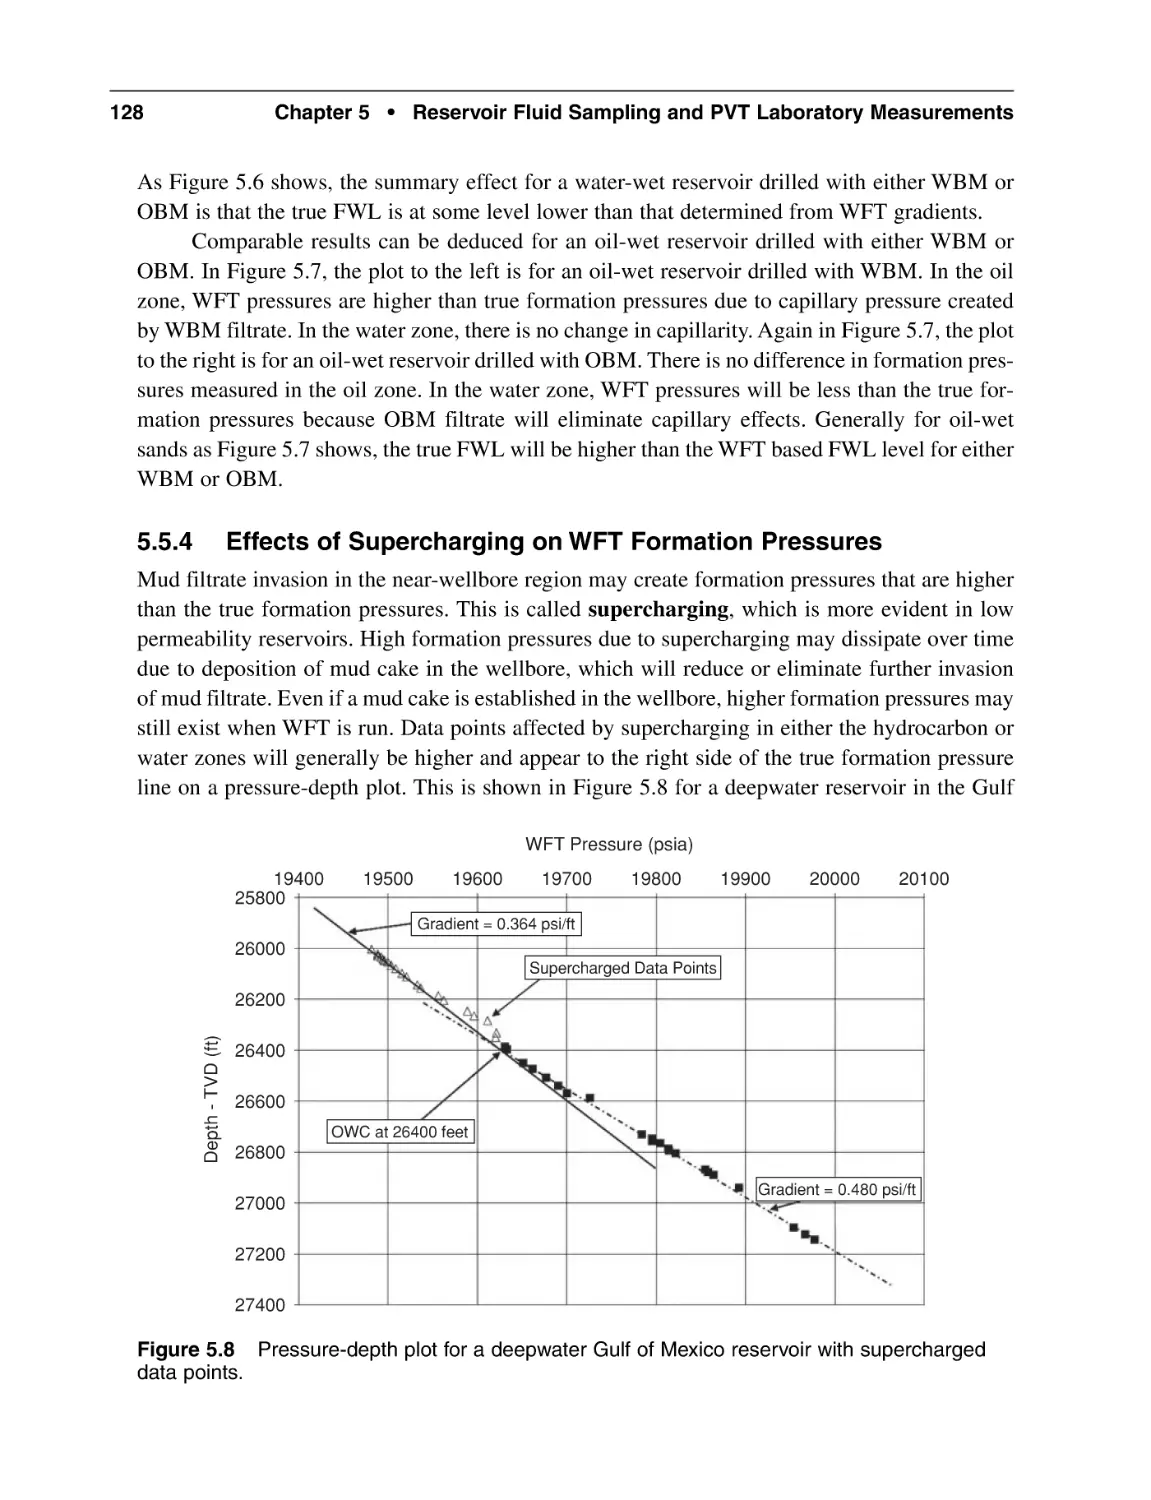 5.5.4 Effects of Supercharging on WFT Formation Pressures